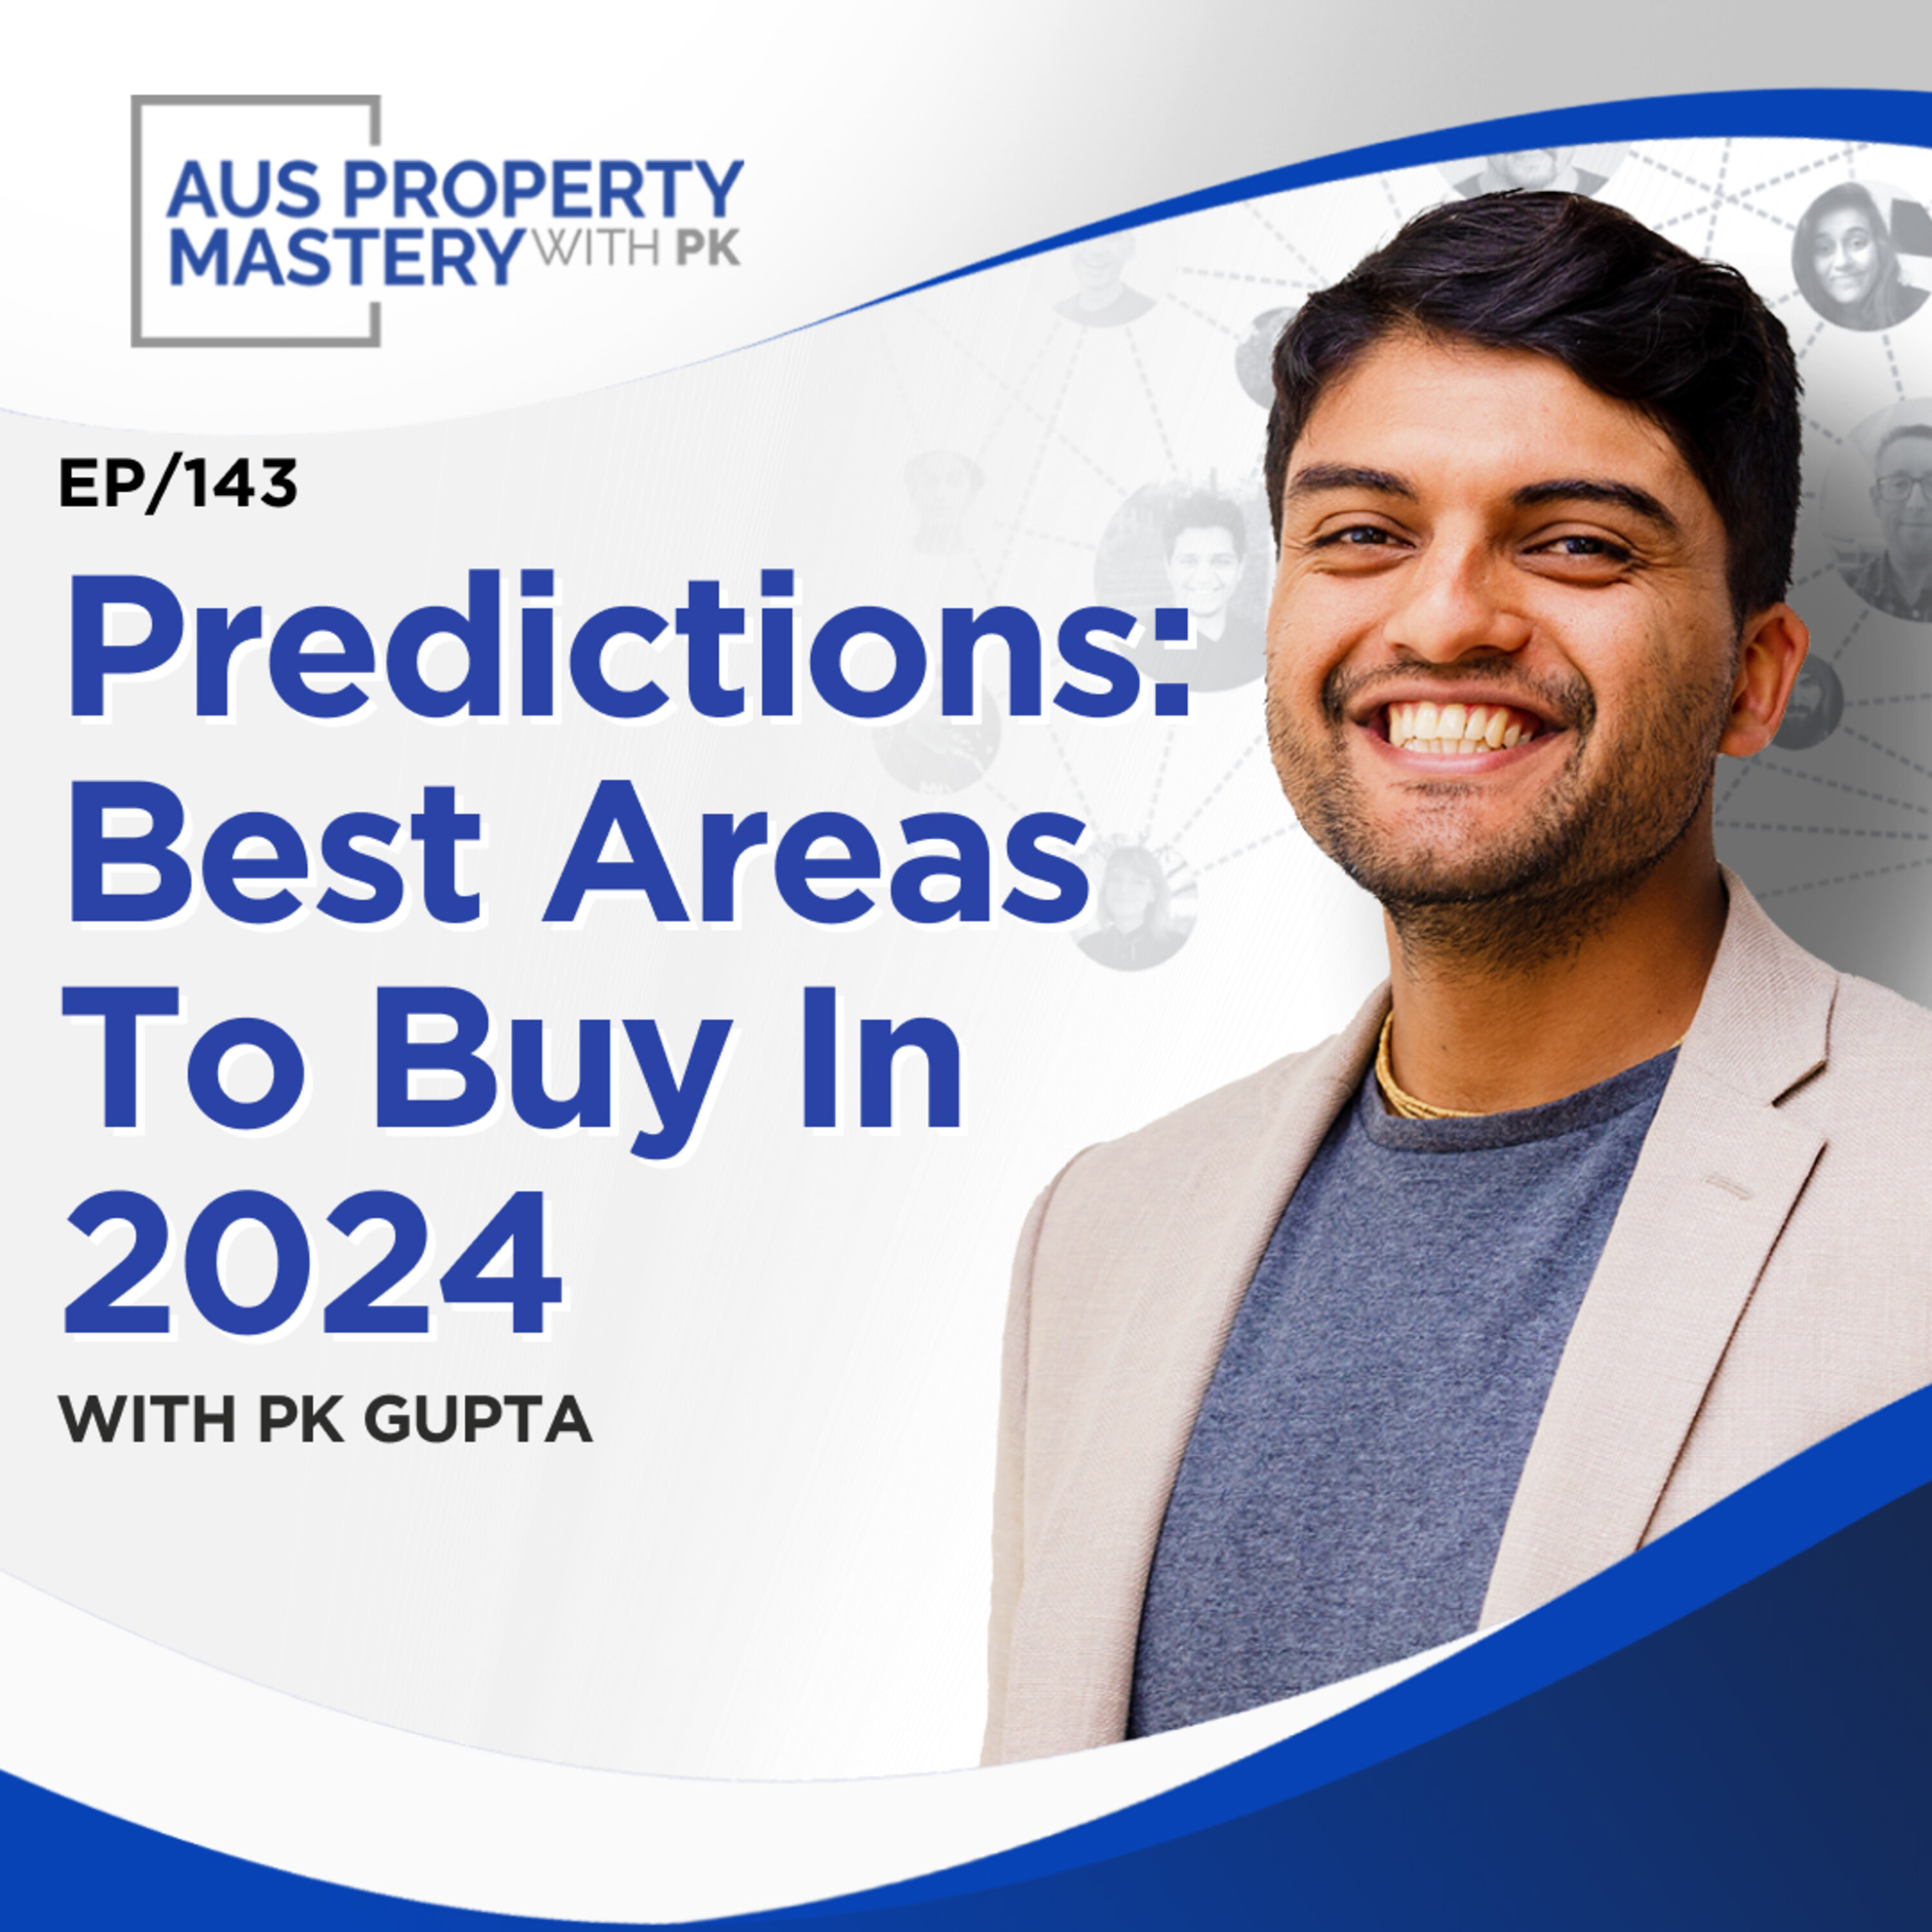 Predictions: Best Areas To Buy In 2024